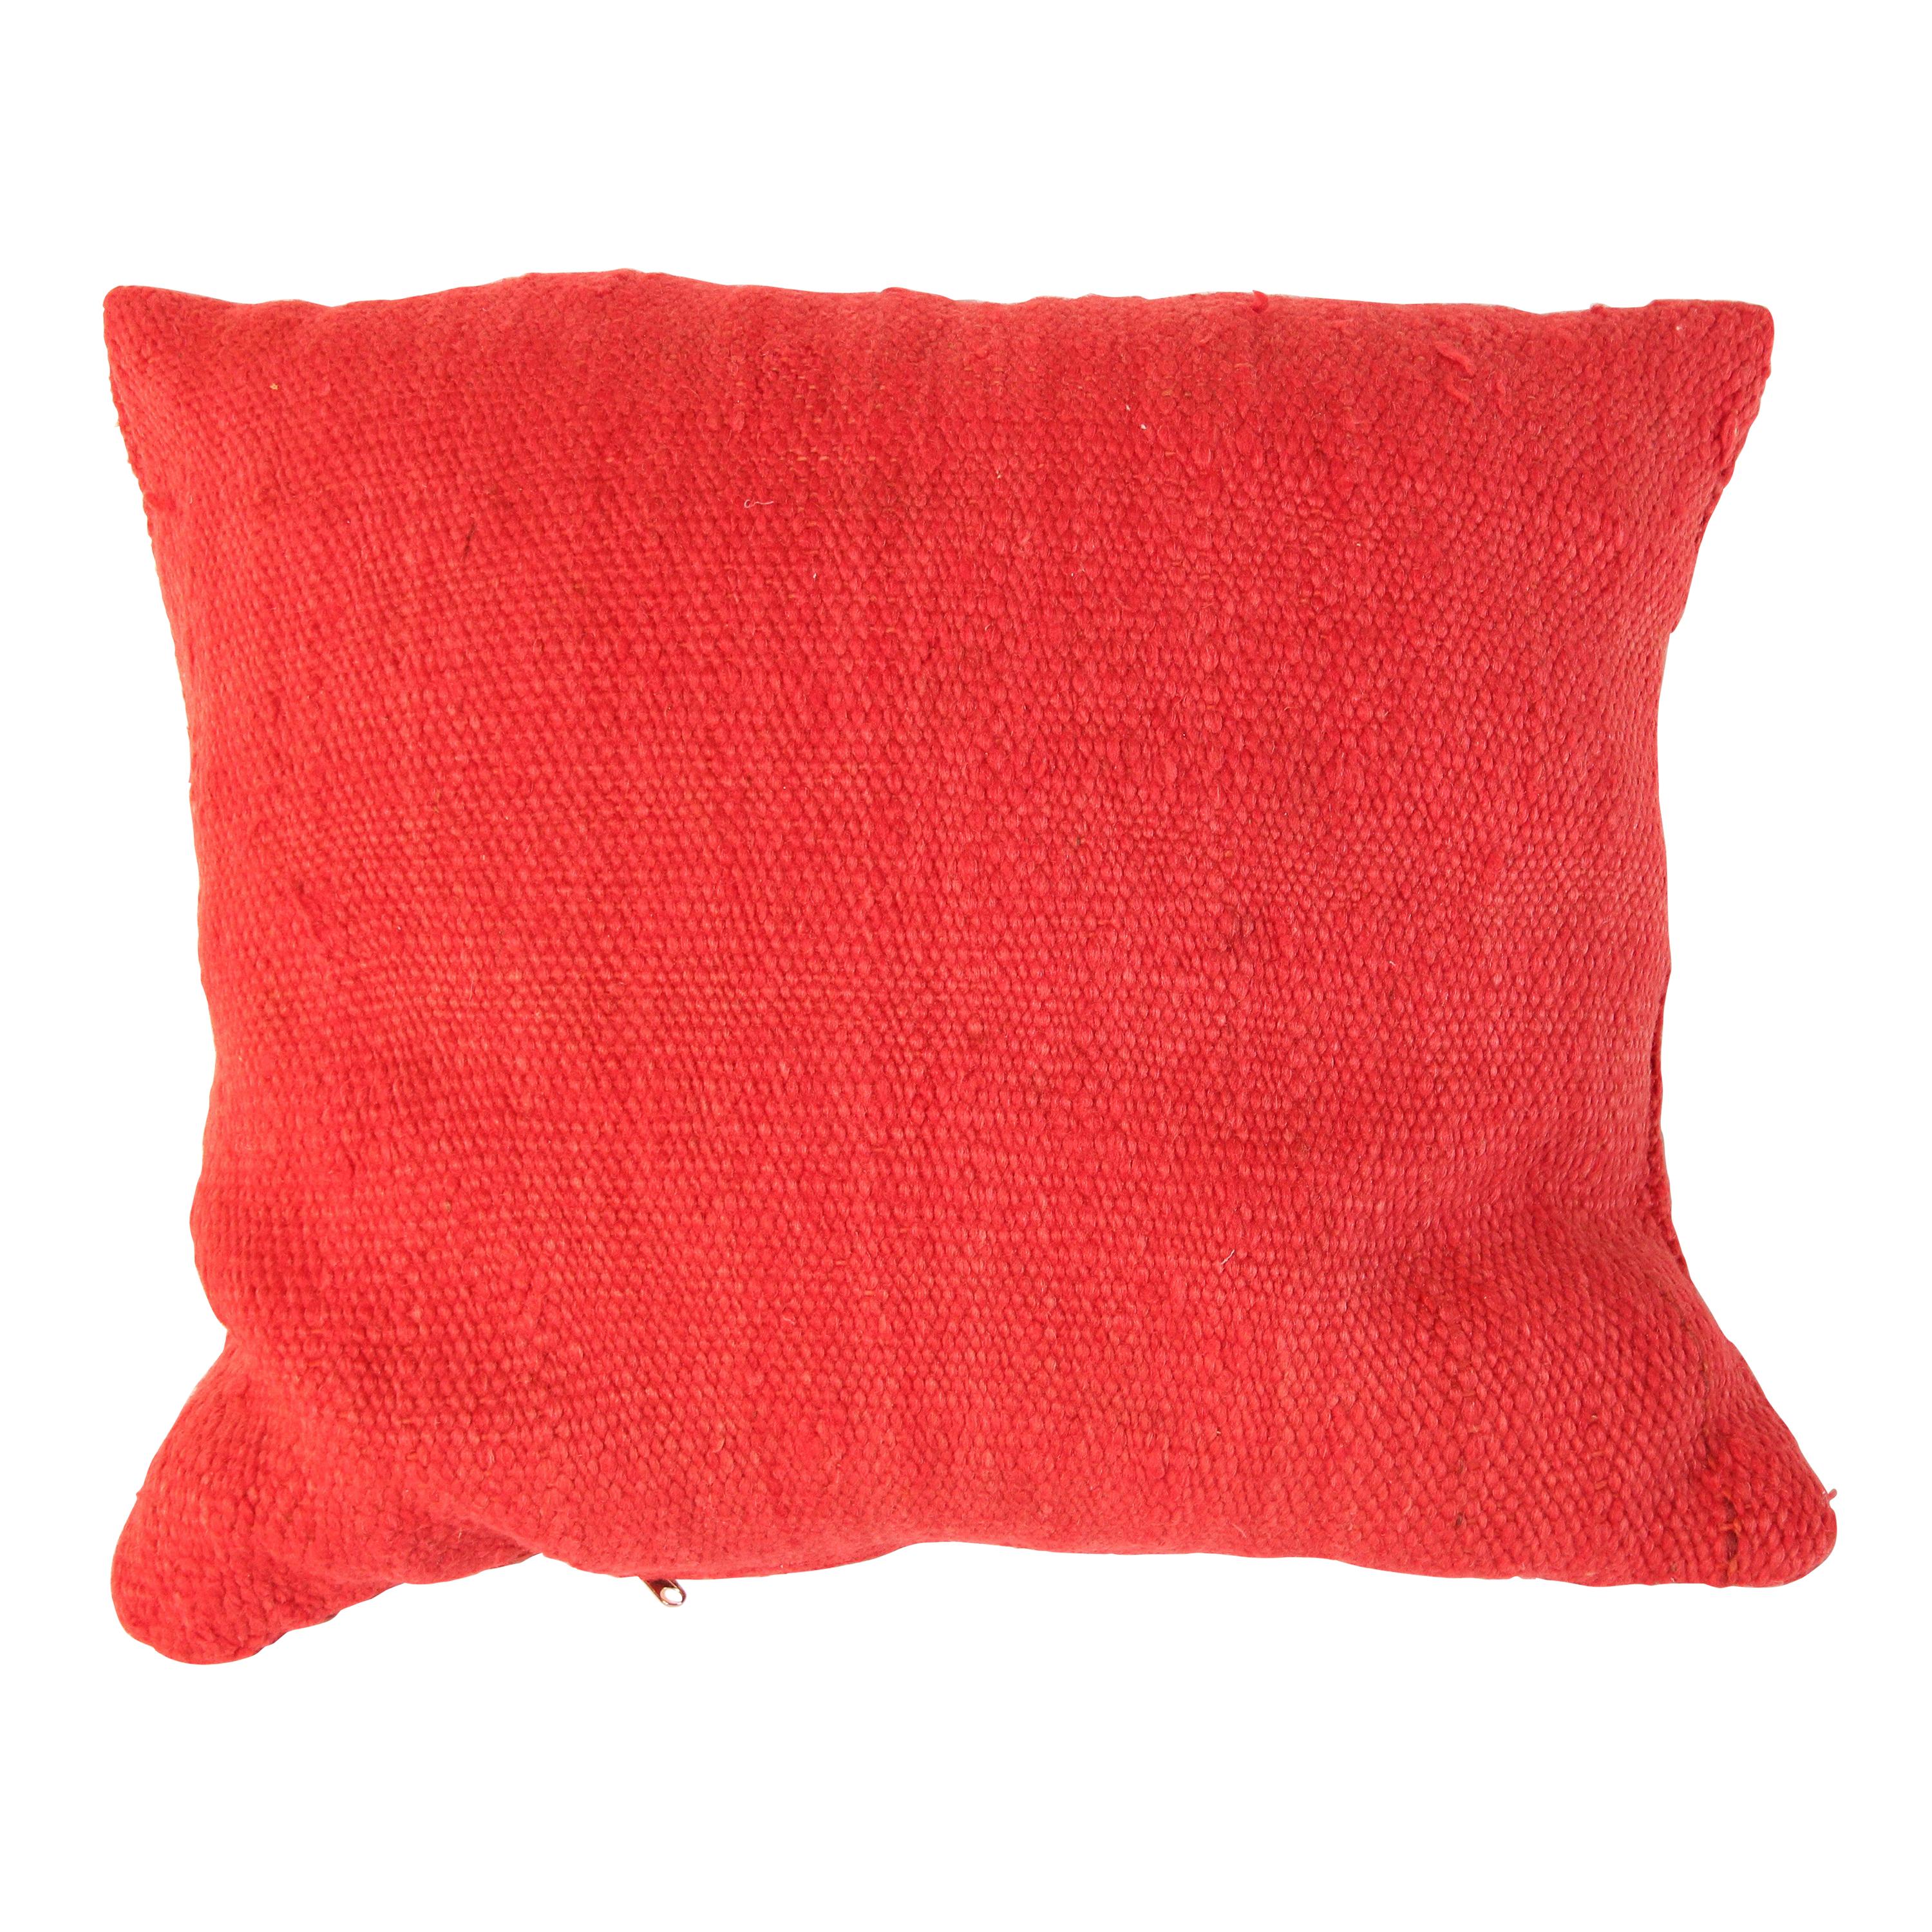 Moroccan Red Berber Pillow Cut from a Vintage Tribal Stripes Rug